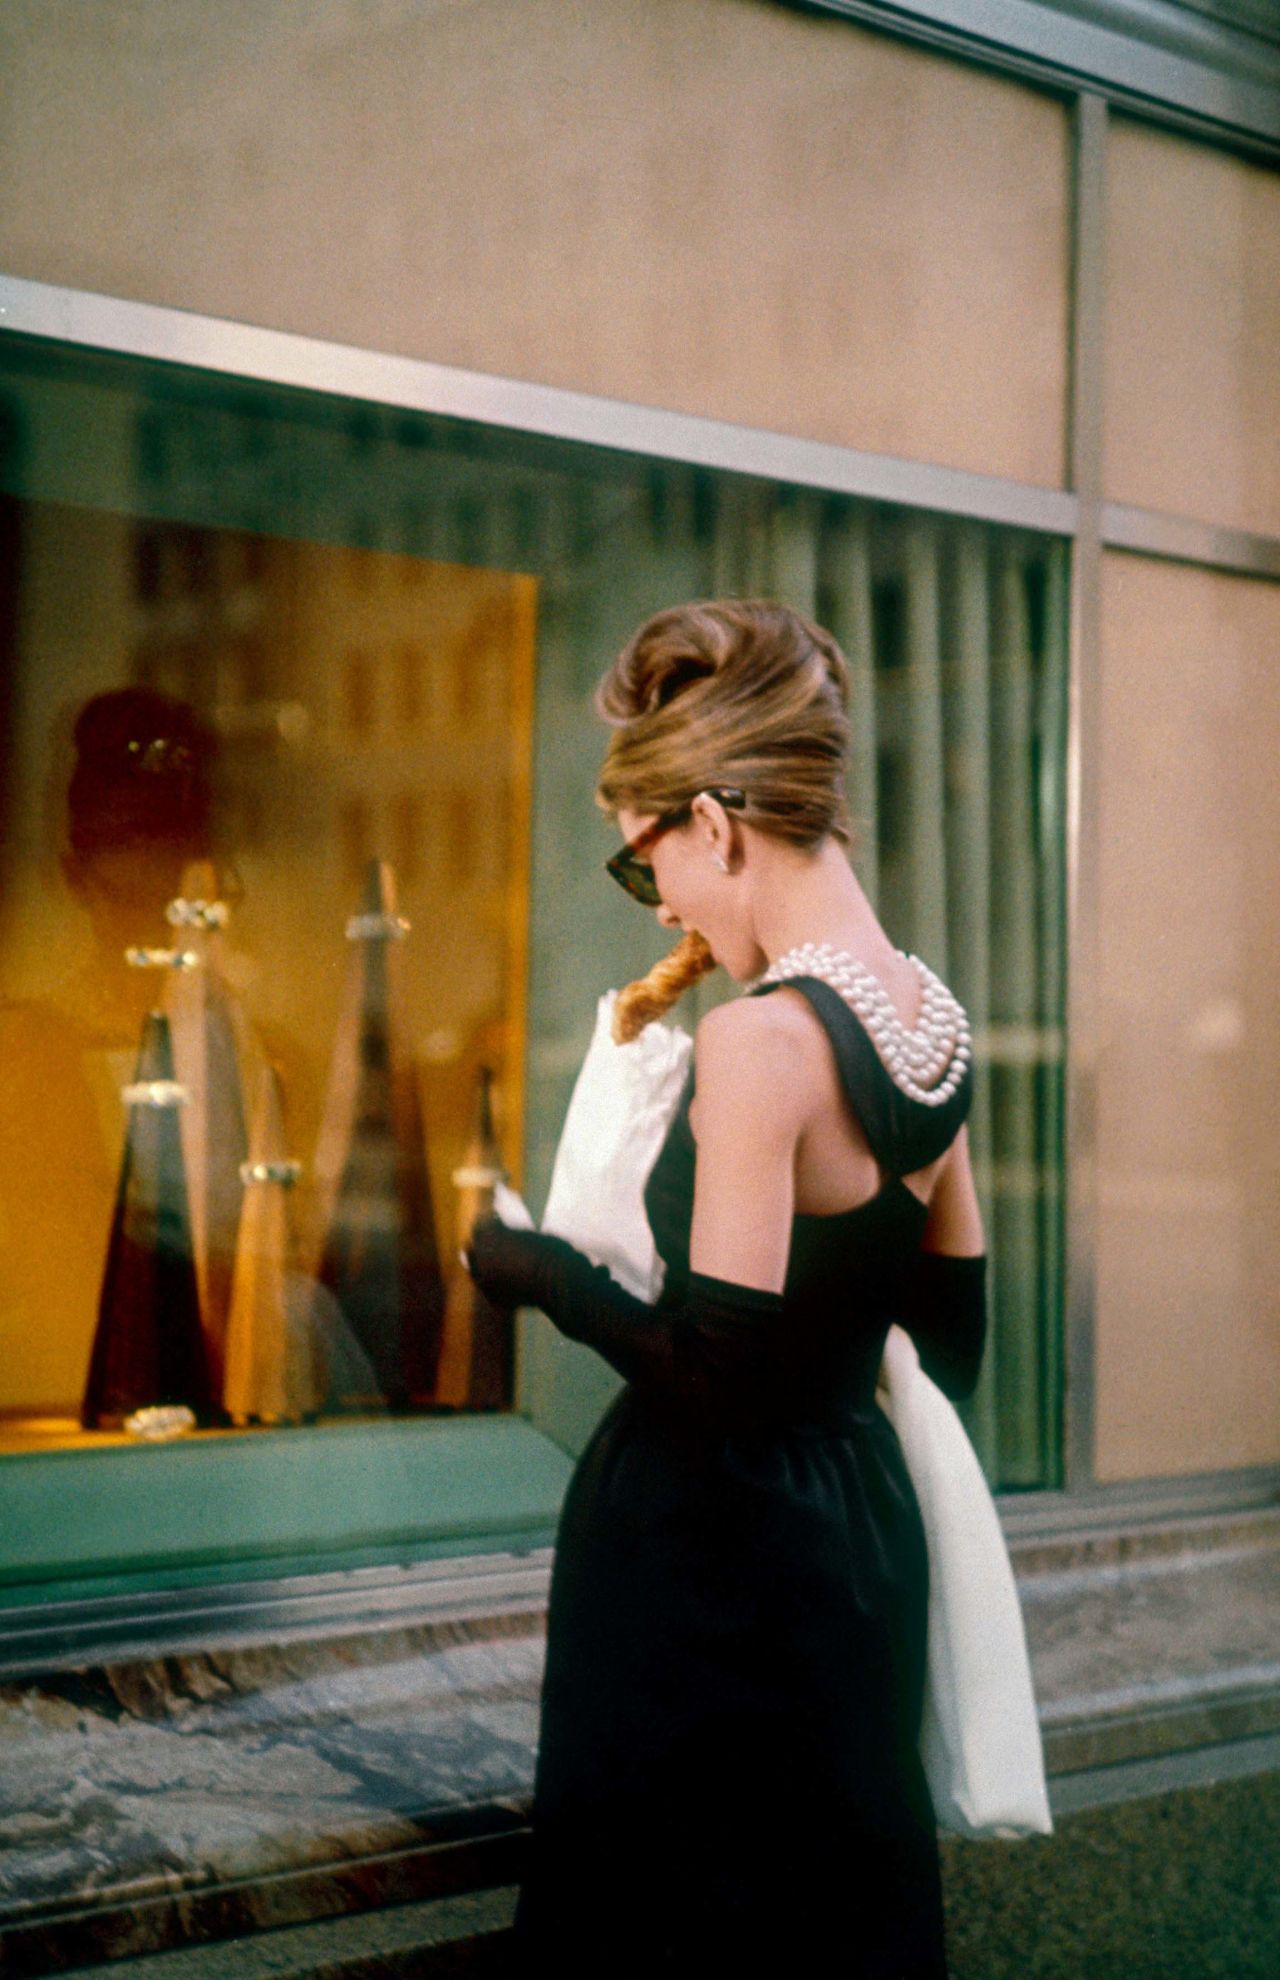 Audrey Hepburn's dress was designed by none other than Hubert de Givenchy, who worked on Hepburn's entire wardrobe for the movie "Breakfast at Tiffany's."